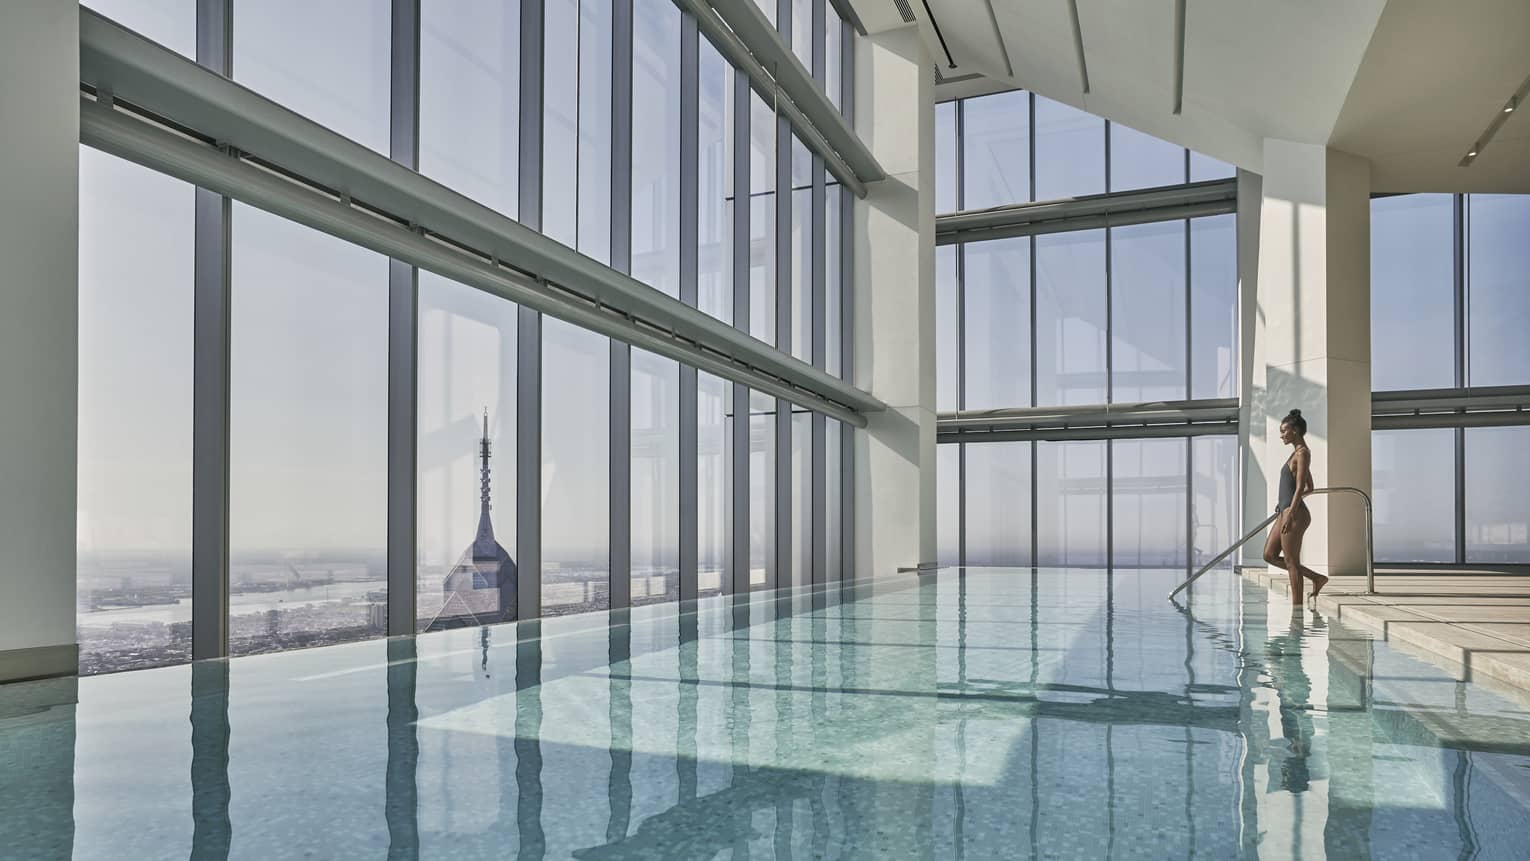 A woman enters a calm indoor pool, glass walls of windows look out to Philadelphia skyline